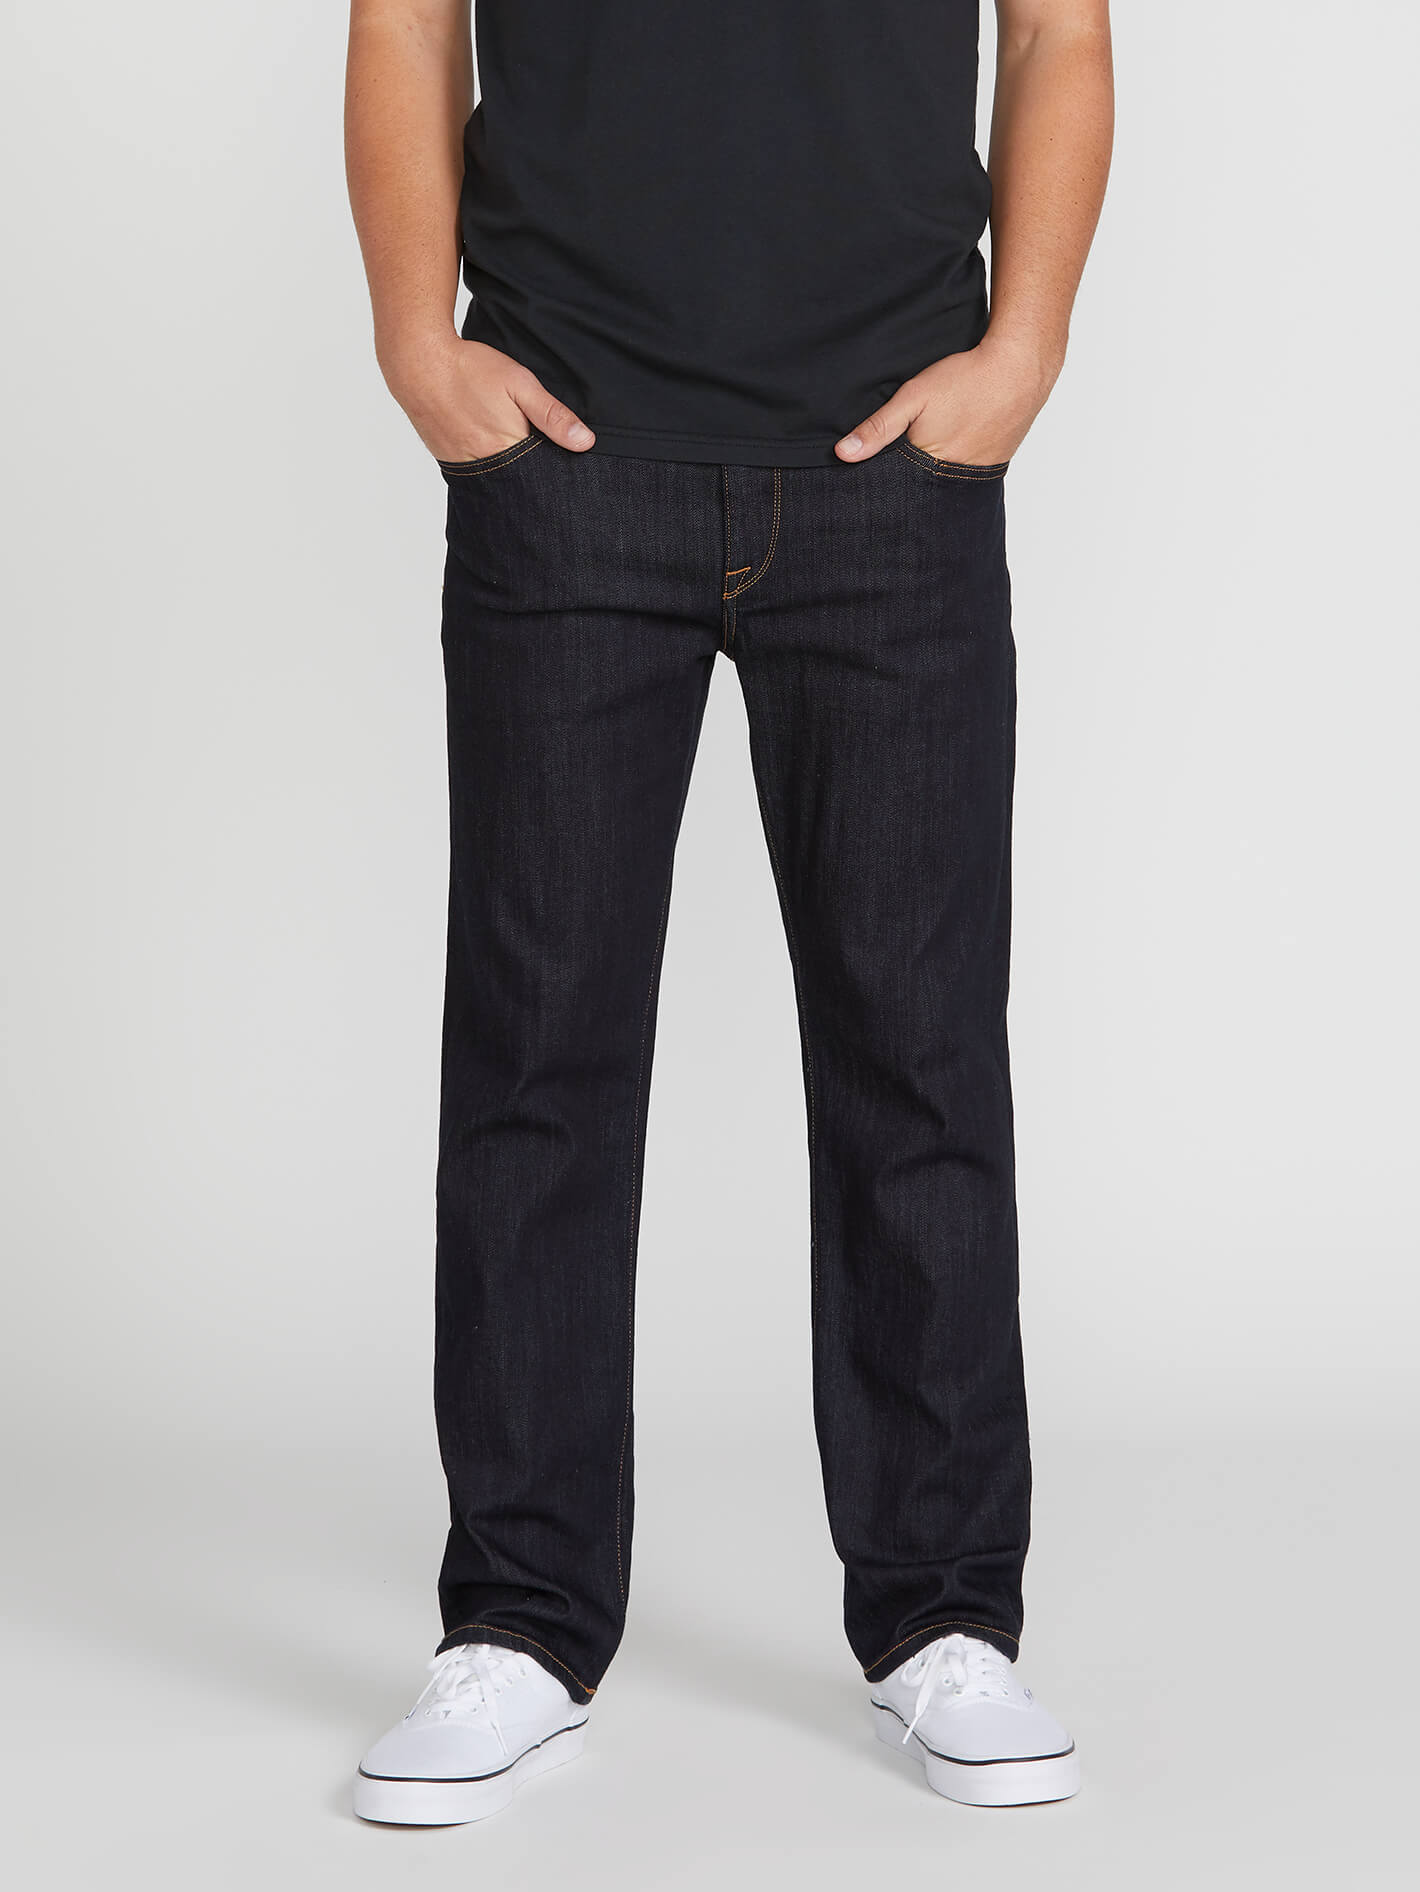 Volcom Solver Modern Fit Jeans - Rinse